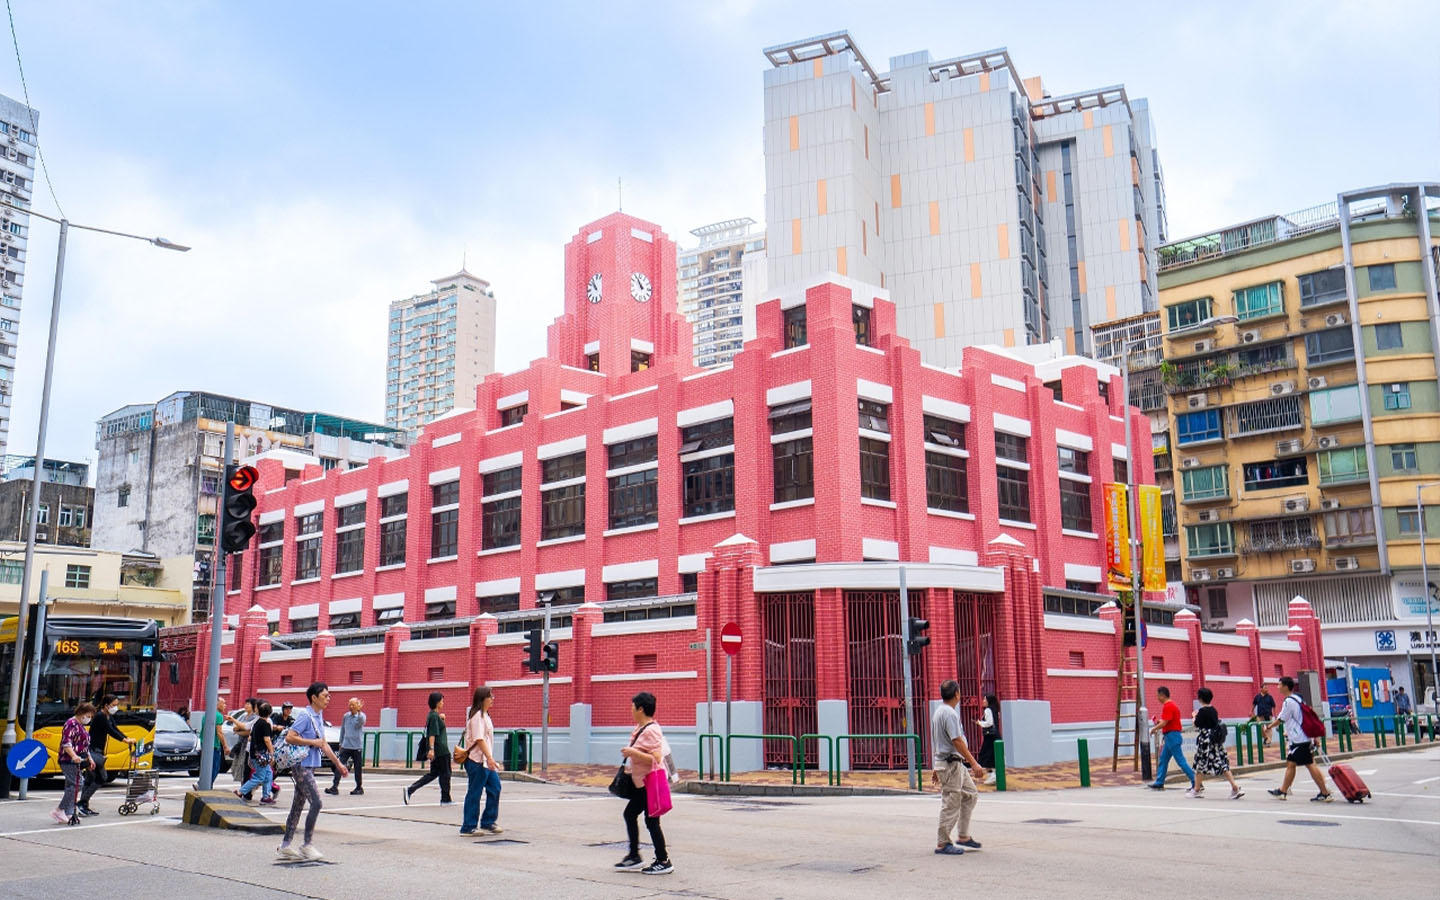 Four things you may not know about Macao’s iconic Red Market